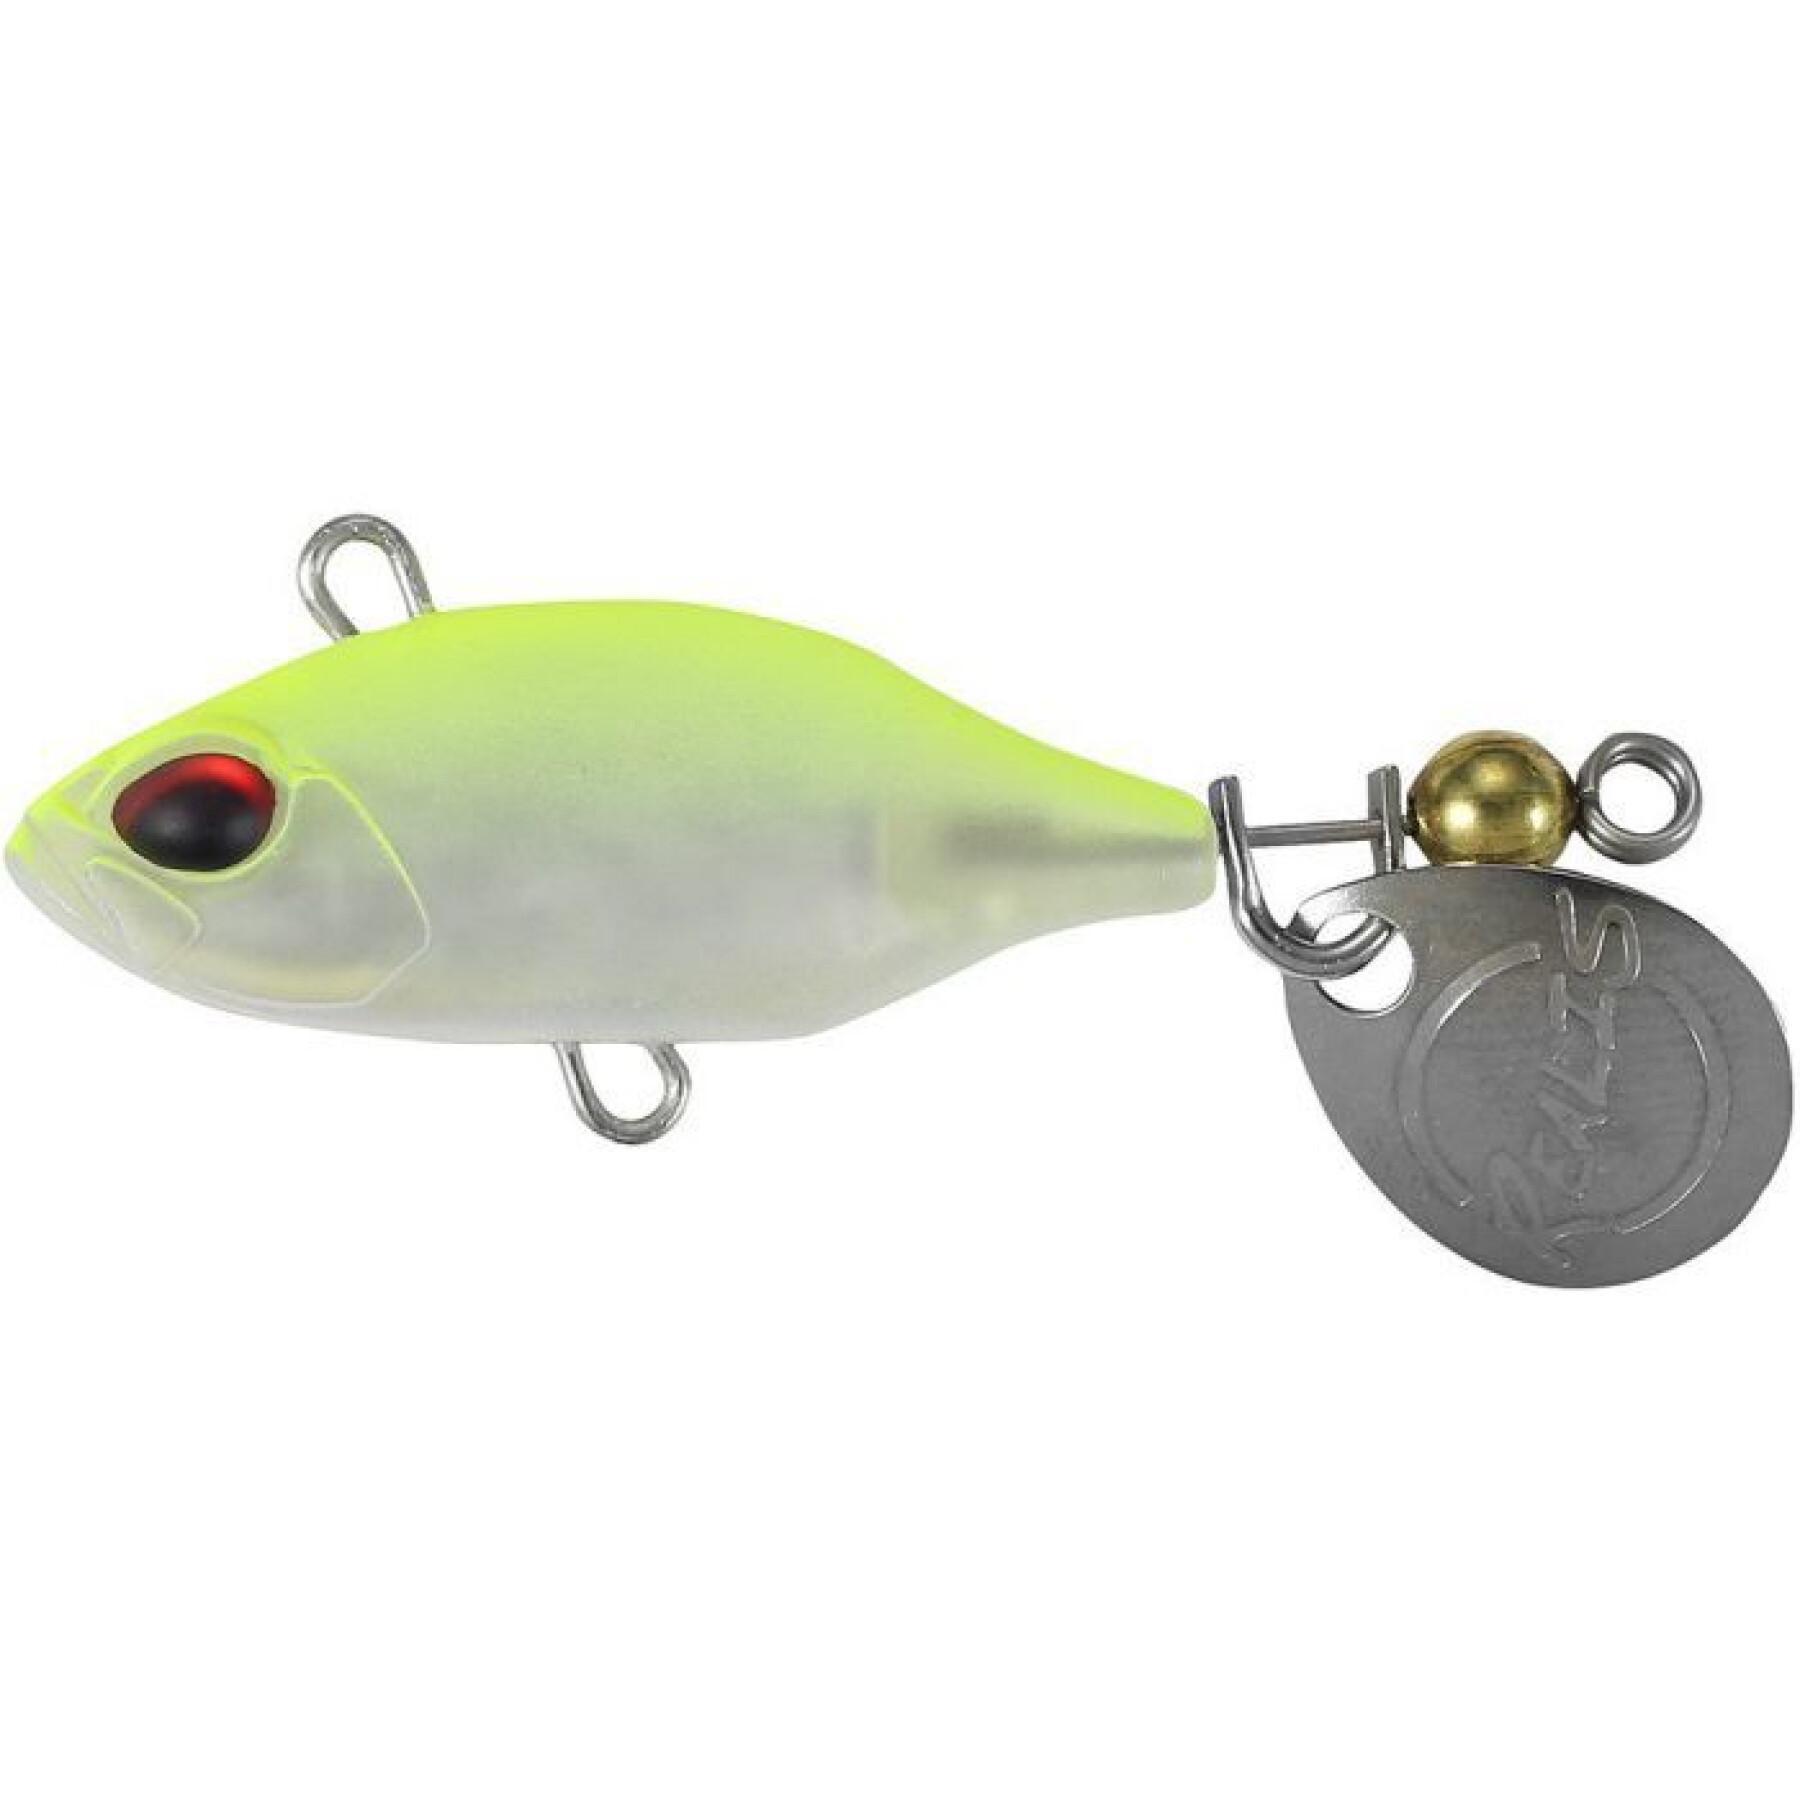 Lure Duo Realis Spin – 14g